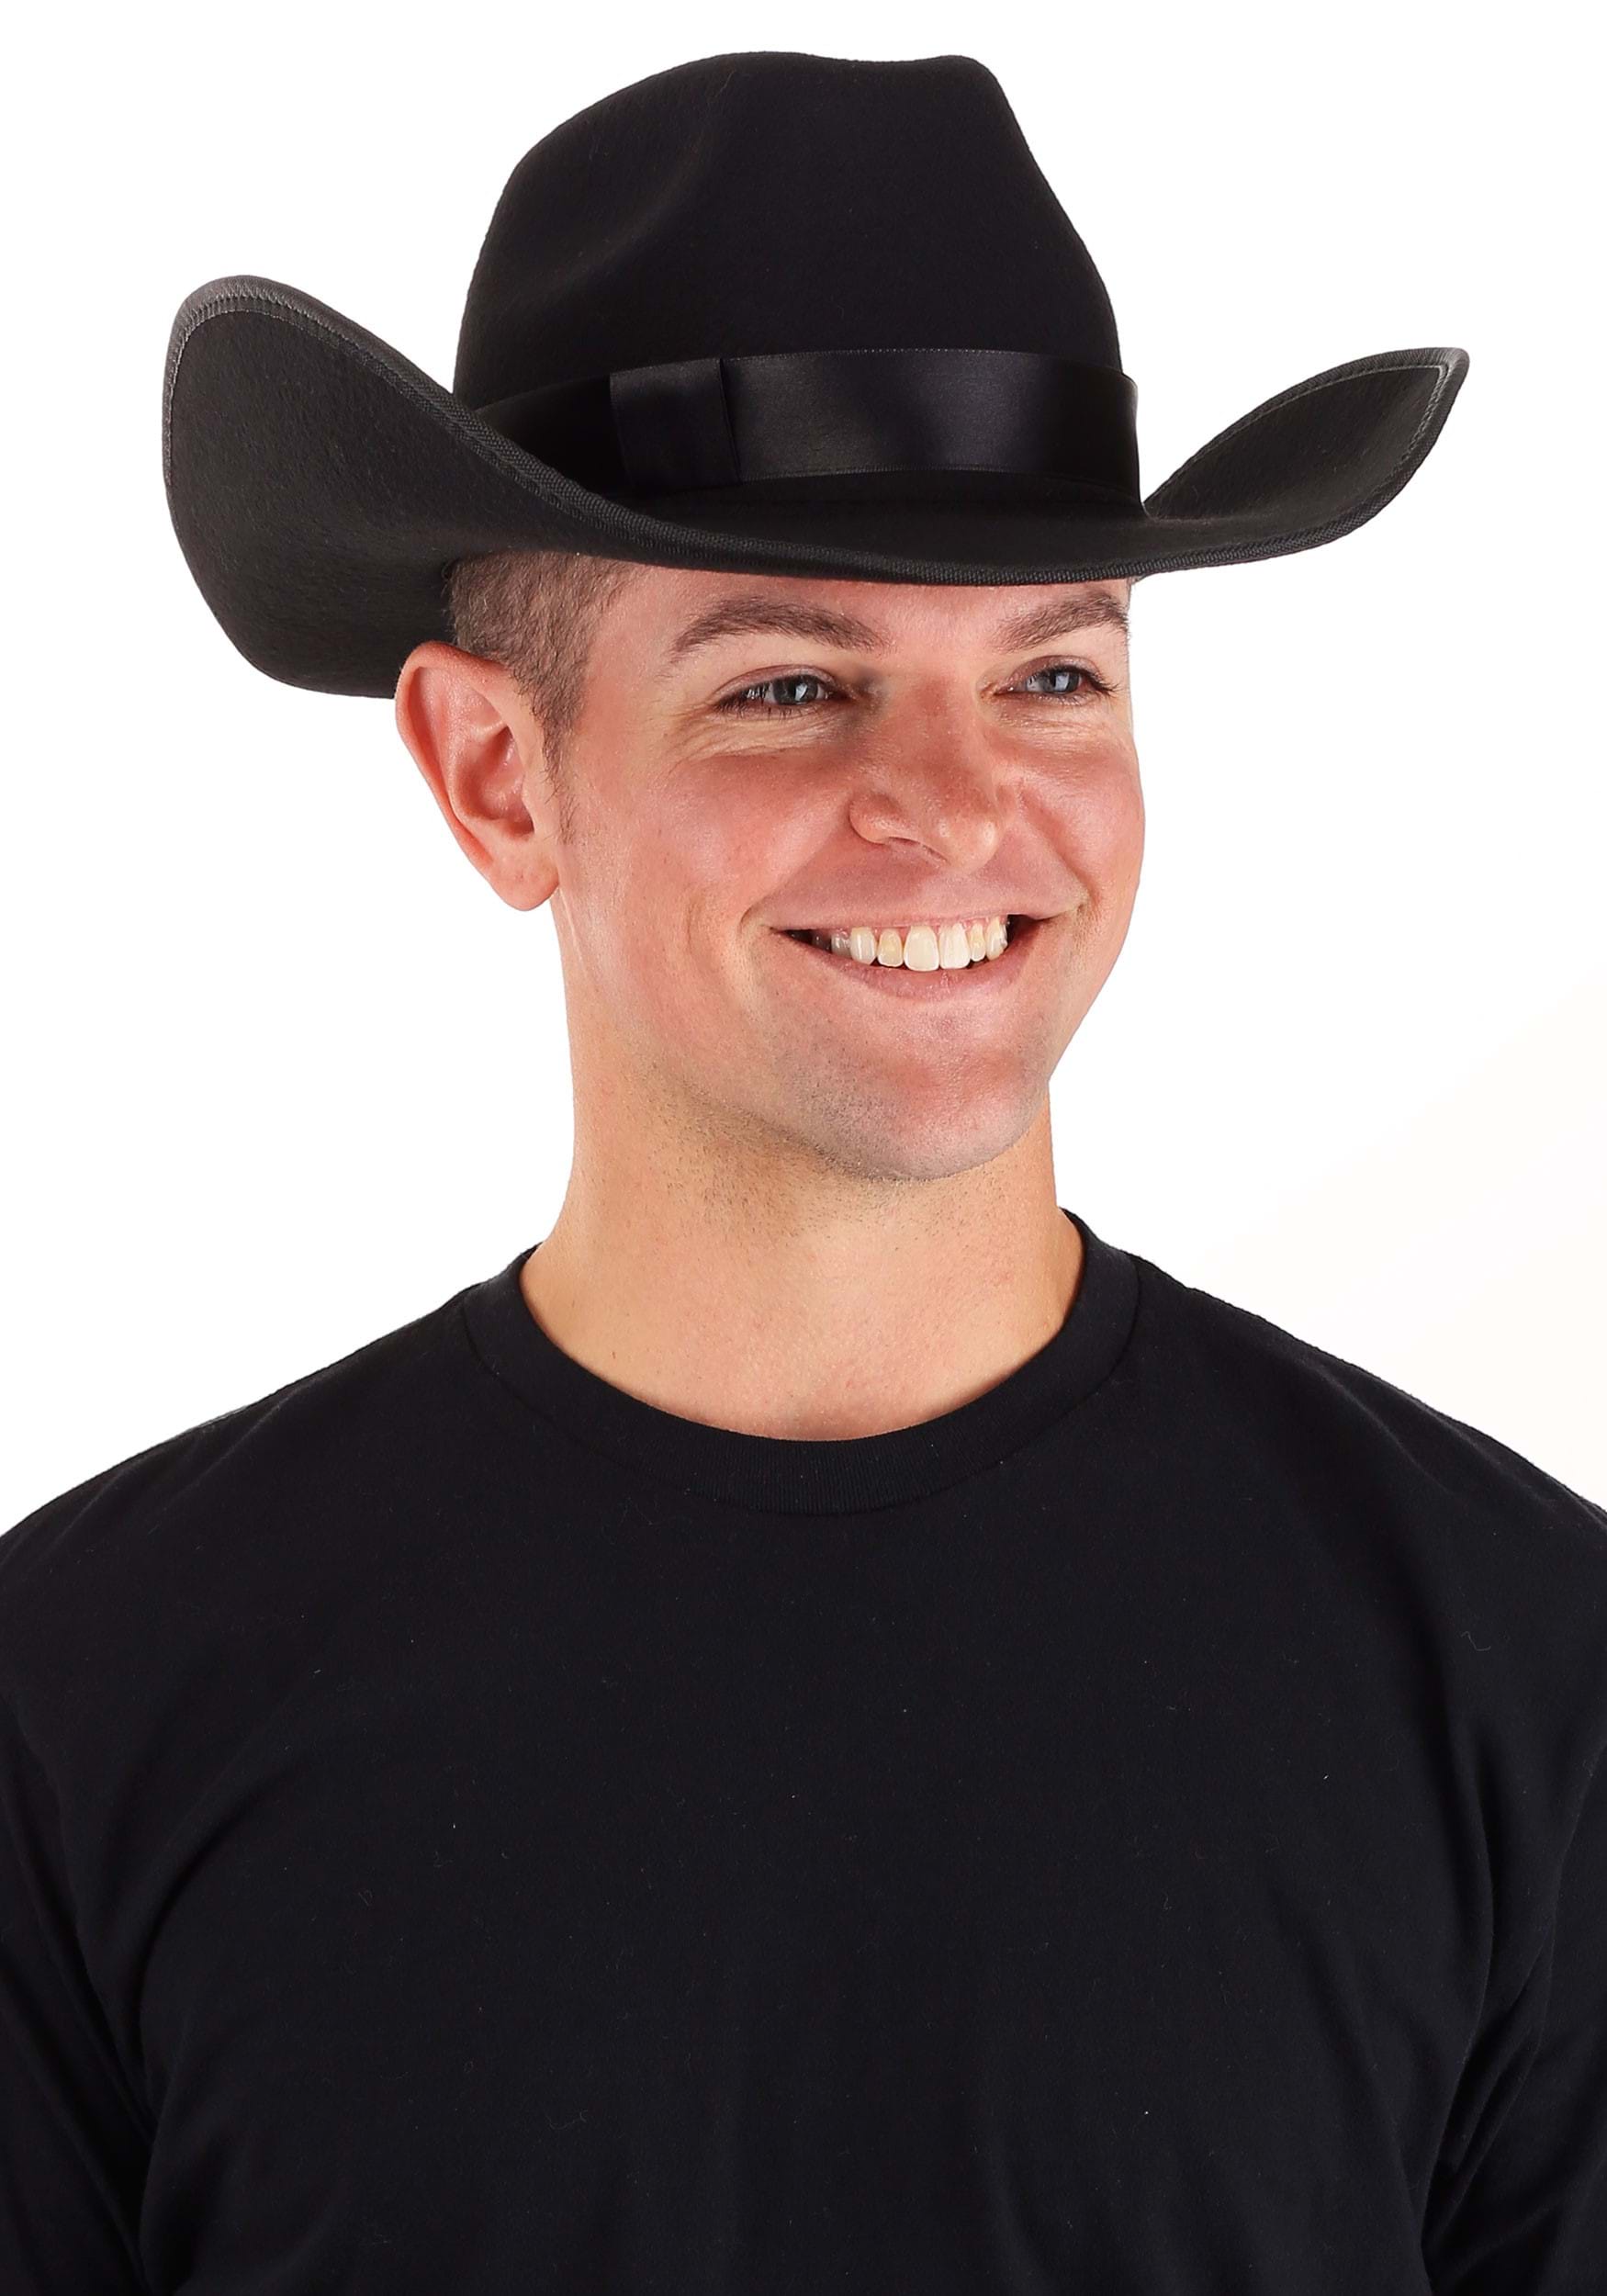 Black Cowboy Costume Hat for Adults